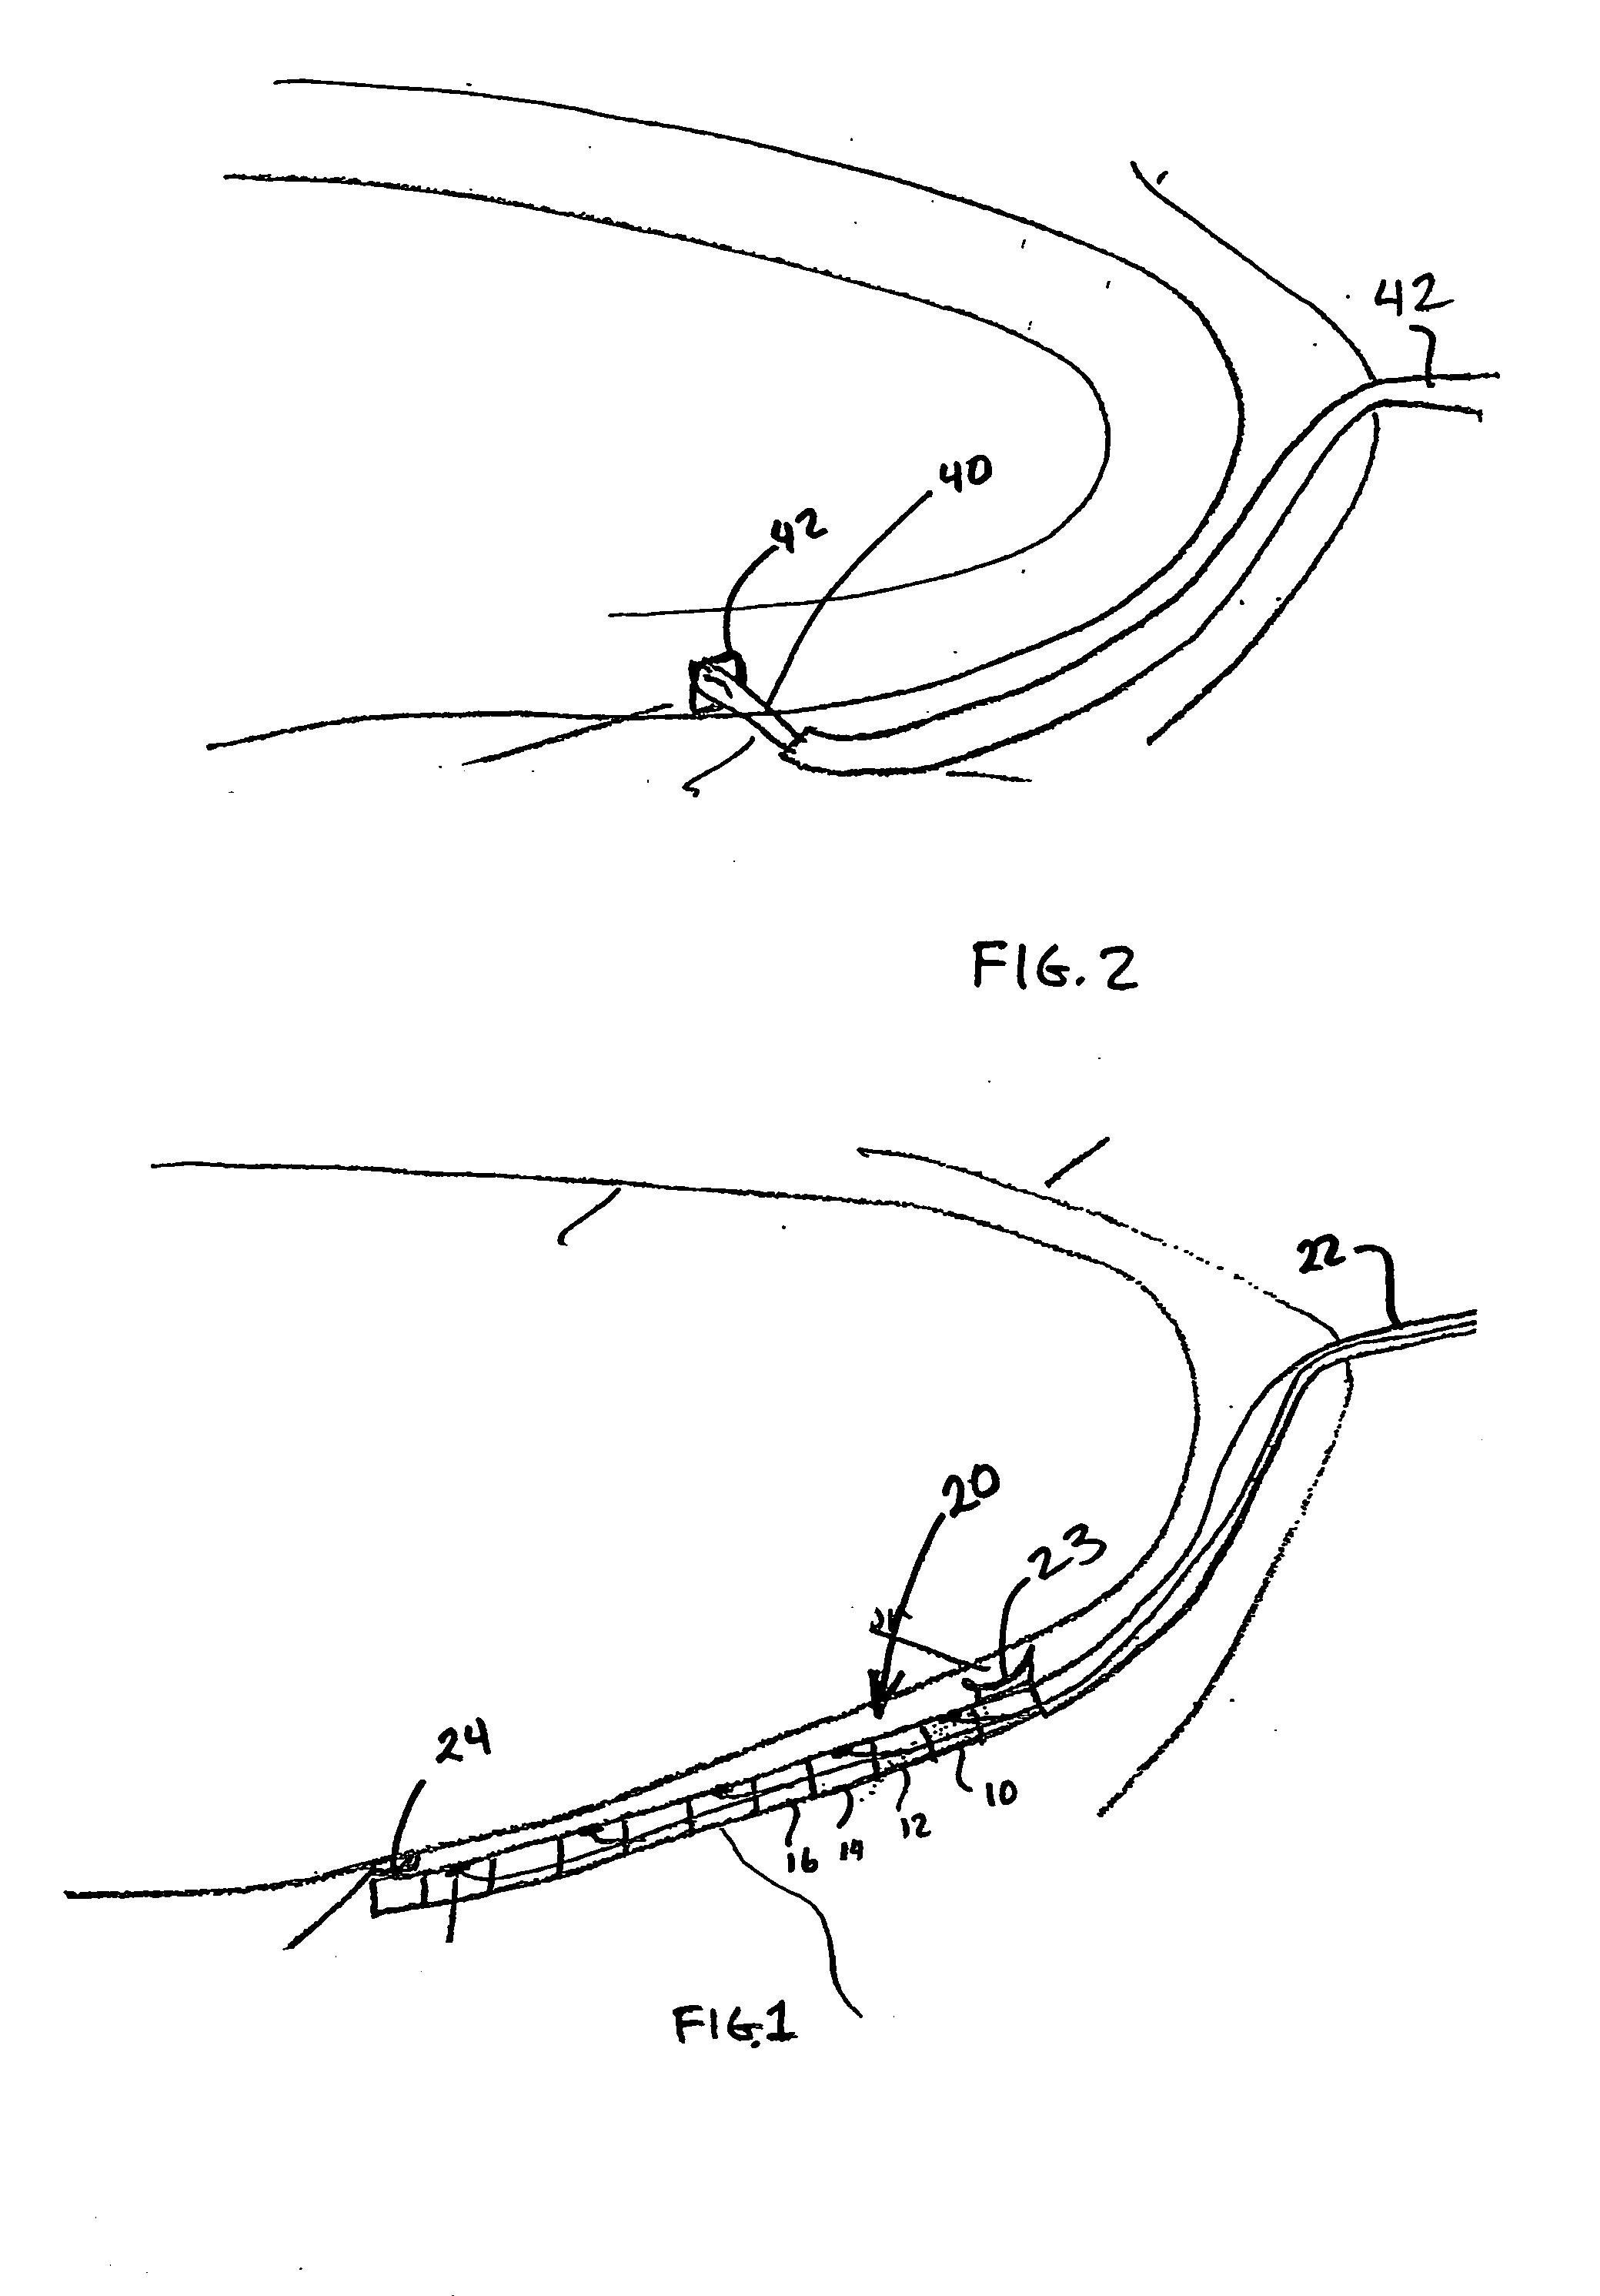 Perficardial pacing lead placement device and method